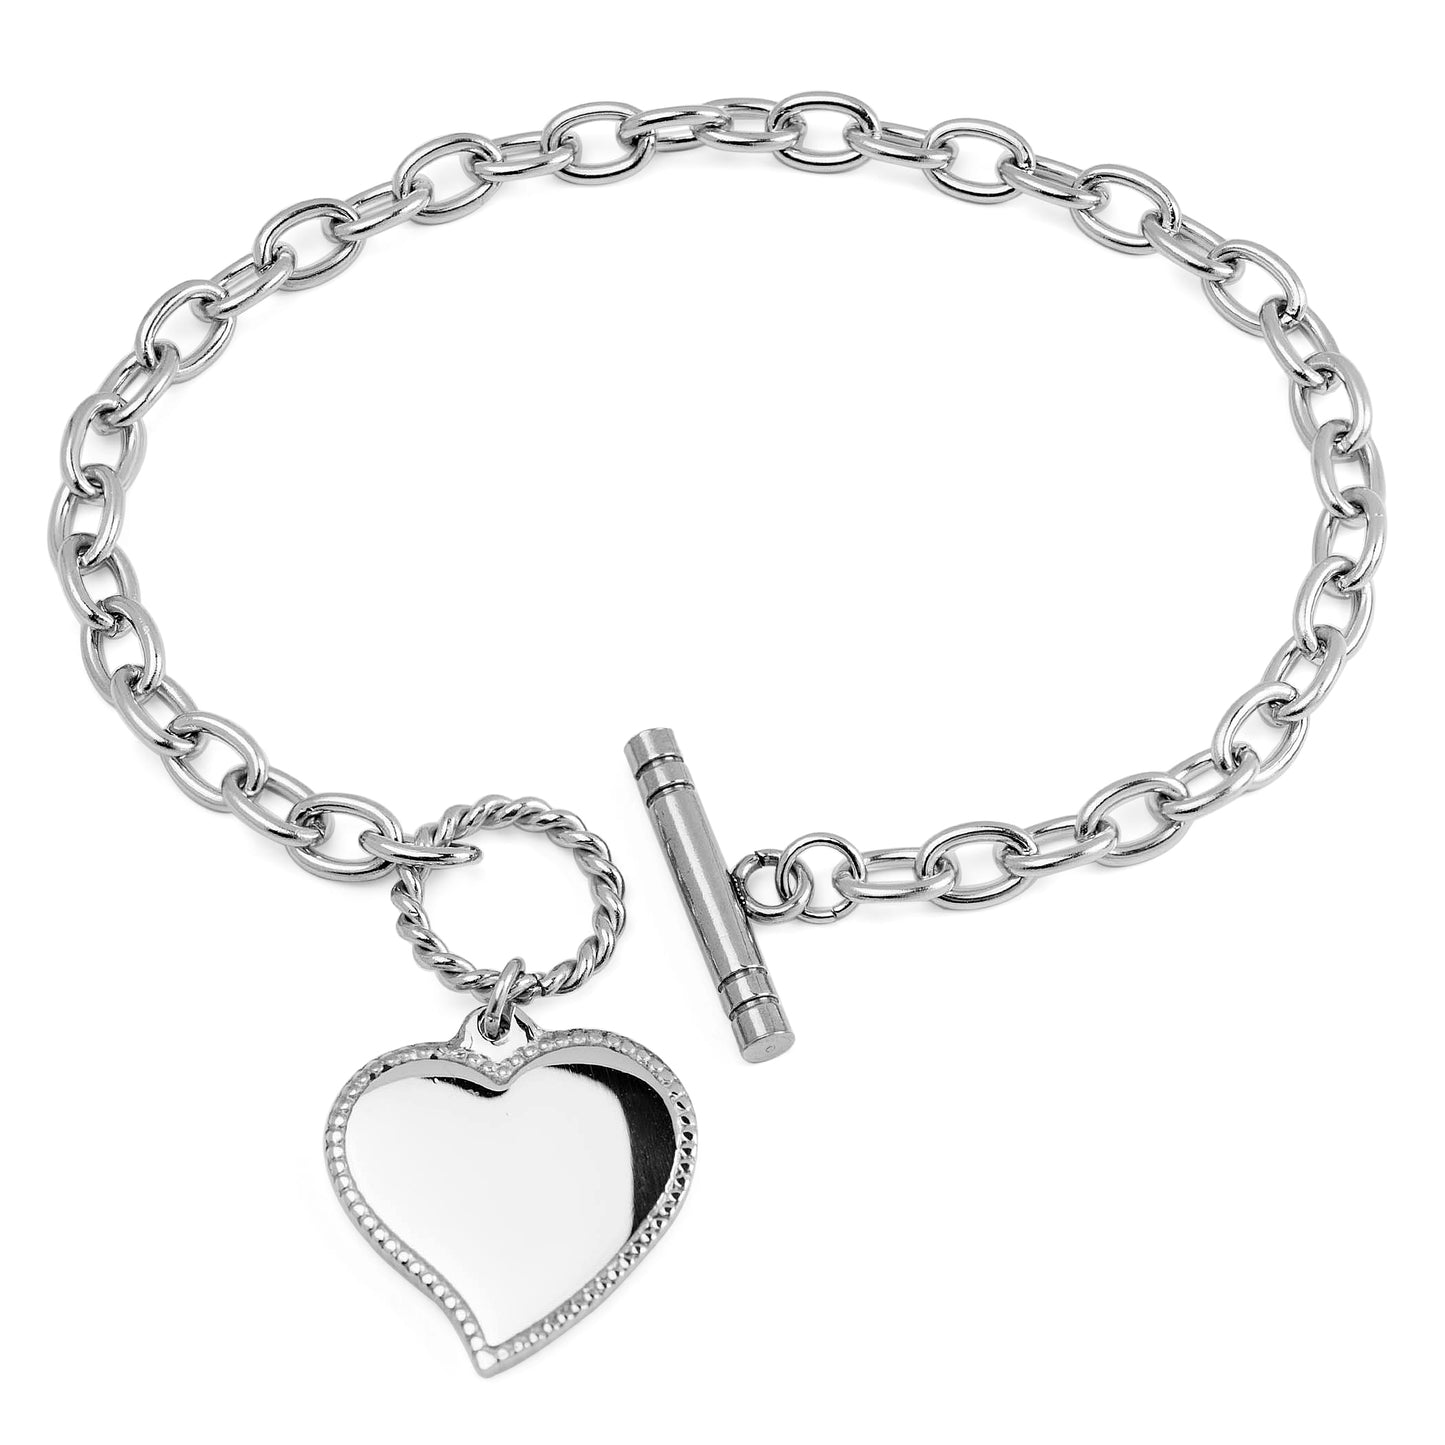 ELYA Women's Polished Heart Charm Cable Chain Link Stainless Steel Bracelet